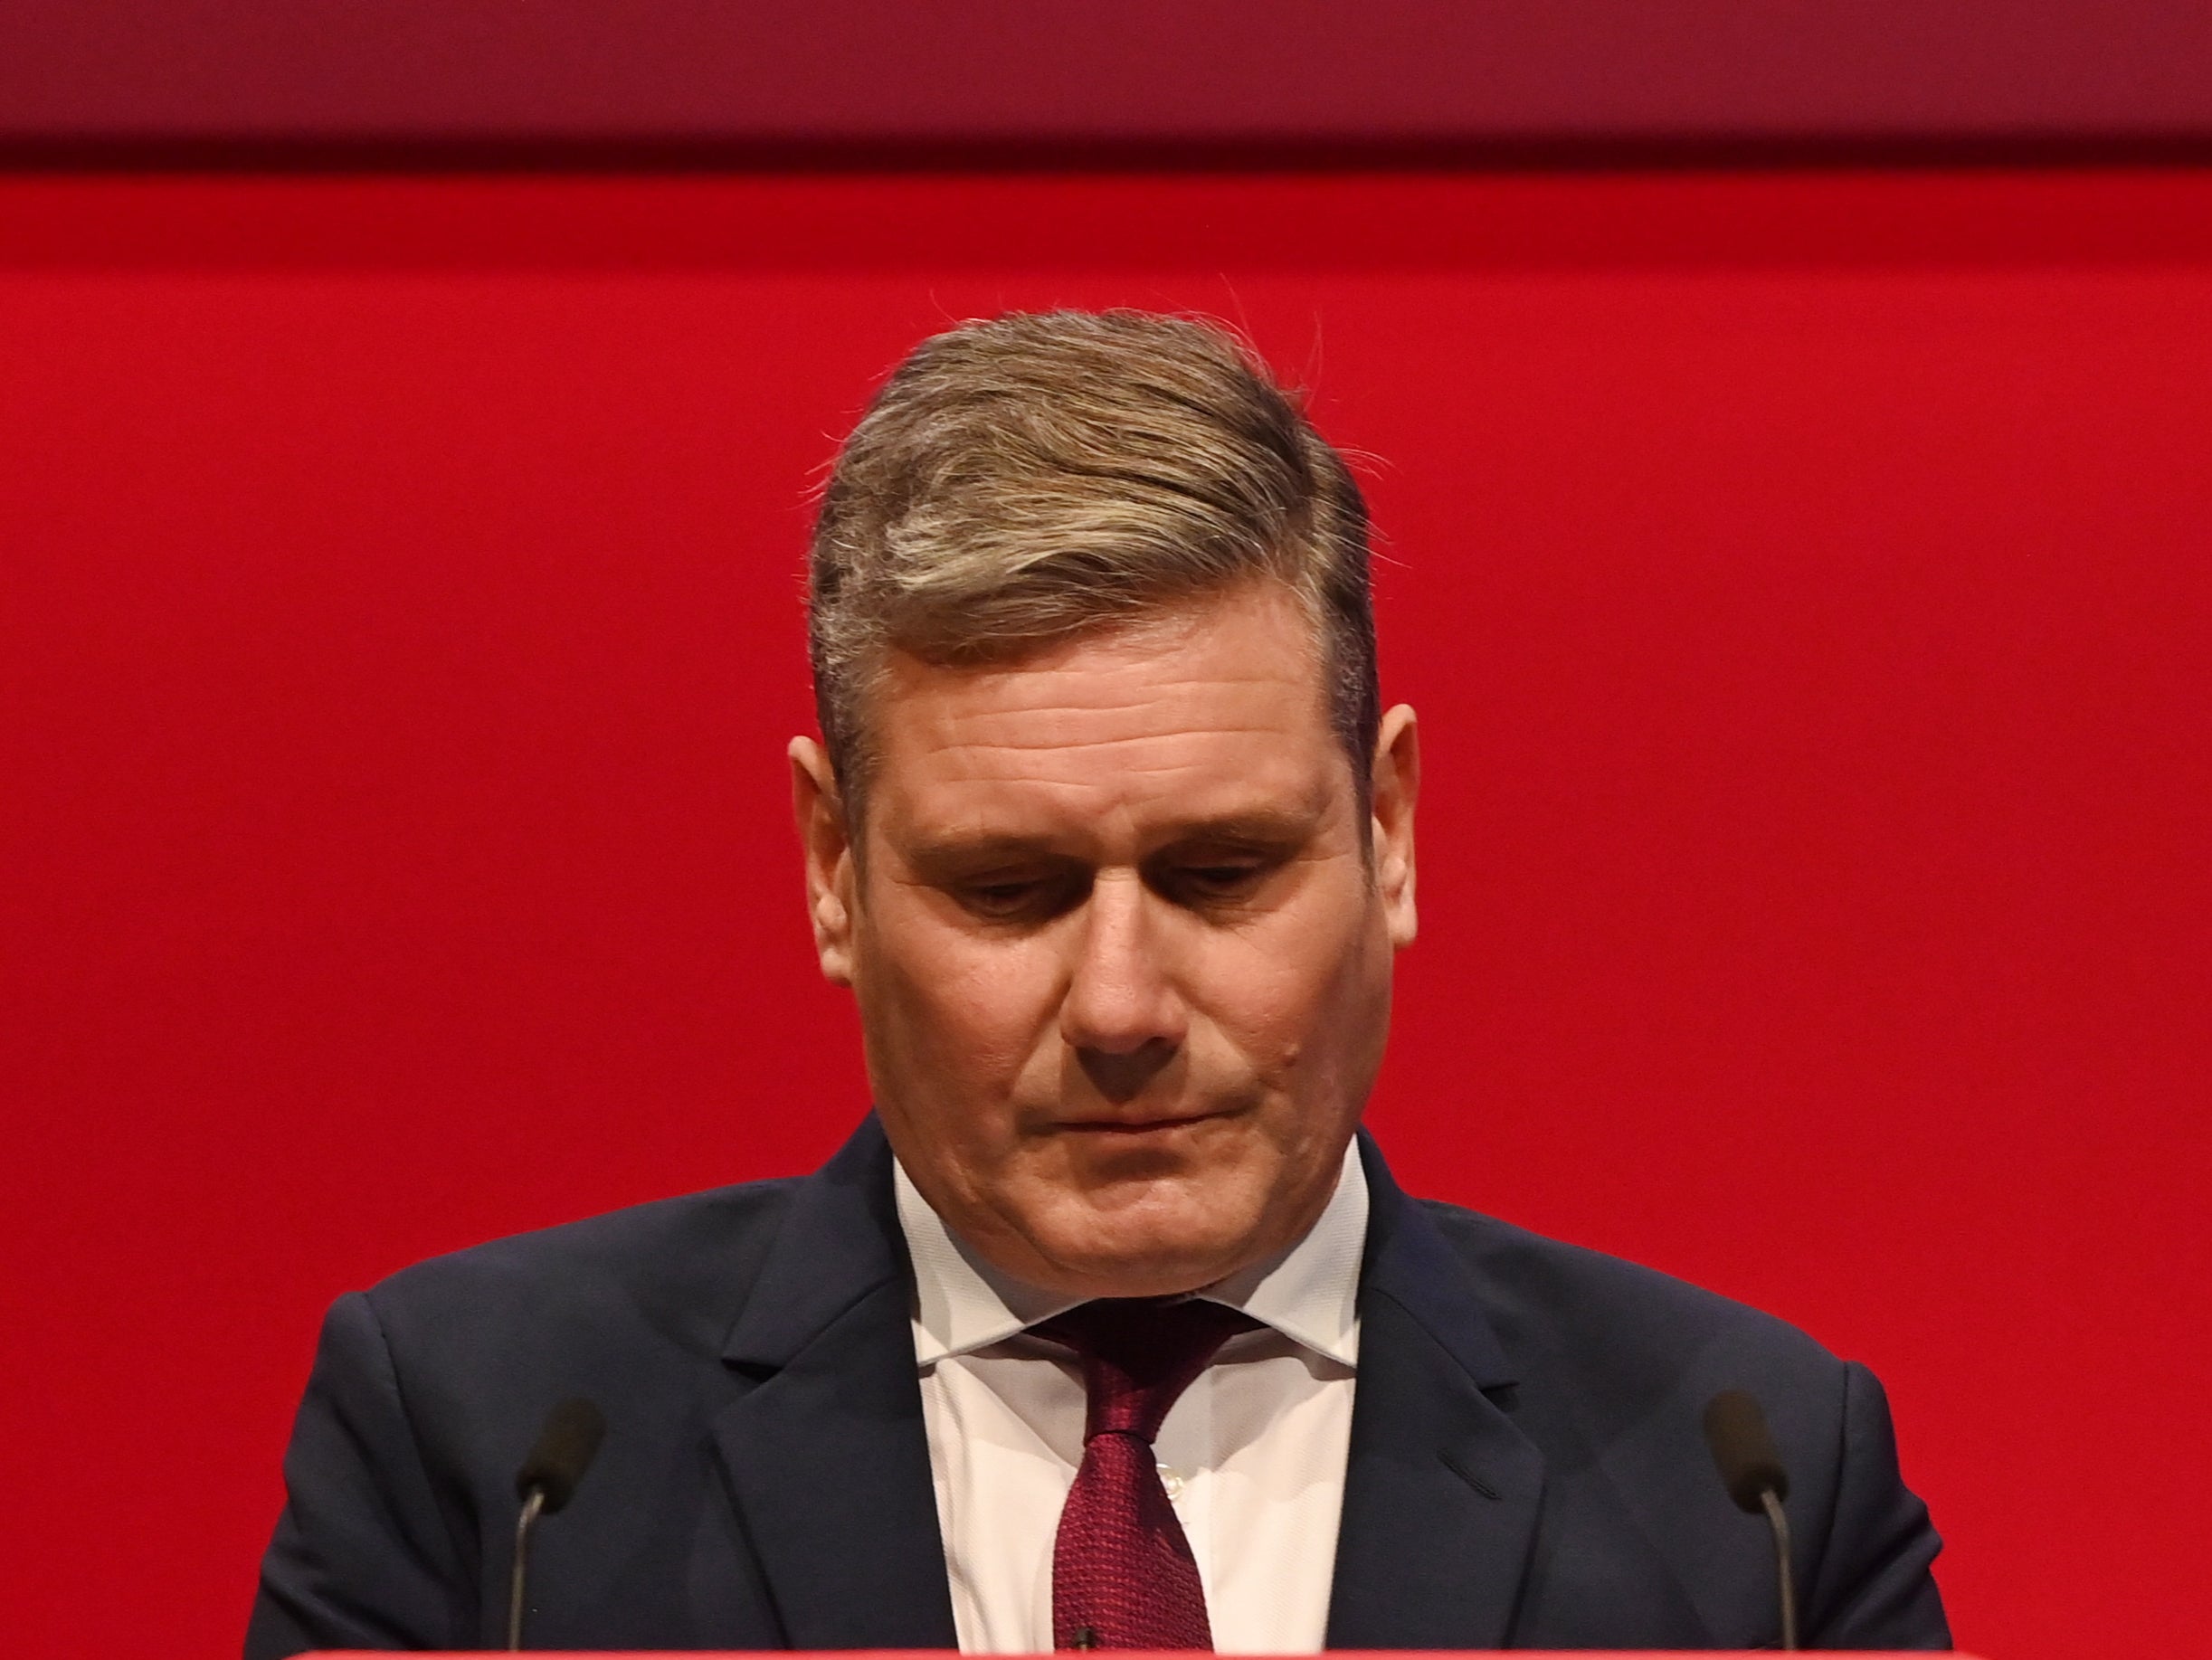 Keir Starmer’s thoughtful conference speech was heckled by ranting leftists, confirming the impression that Labour’s policies are not yet fully cognisant with those of large swathes of their traditional electorate